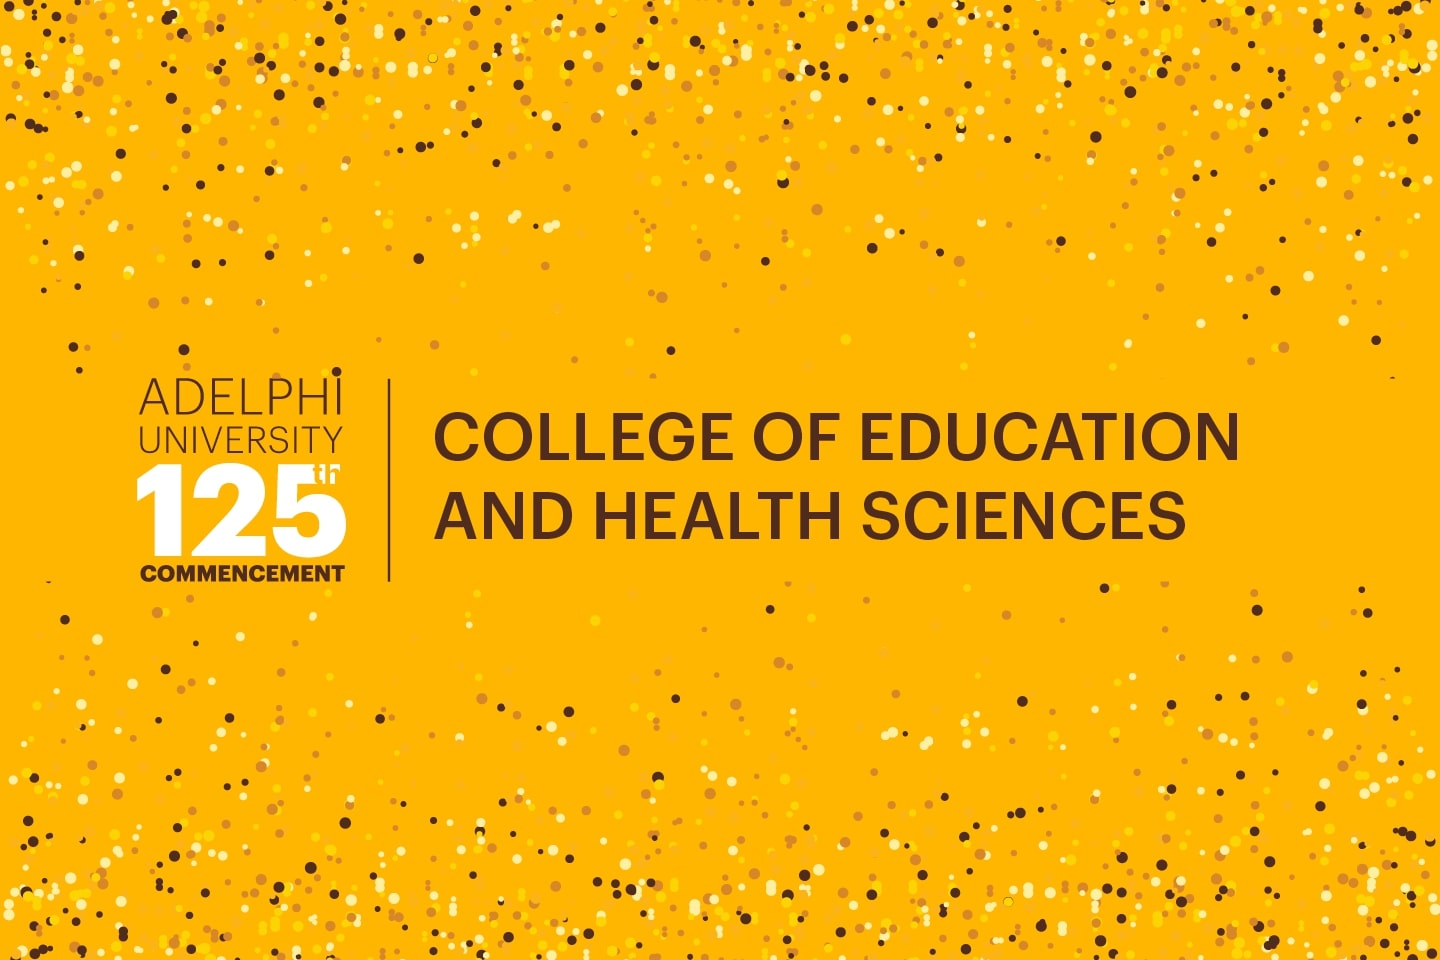 Adelphi University 125th Commencement: College of Education and Health Sciences